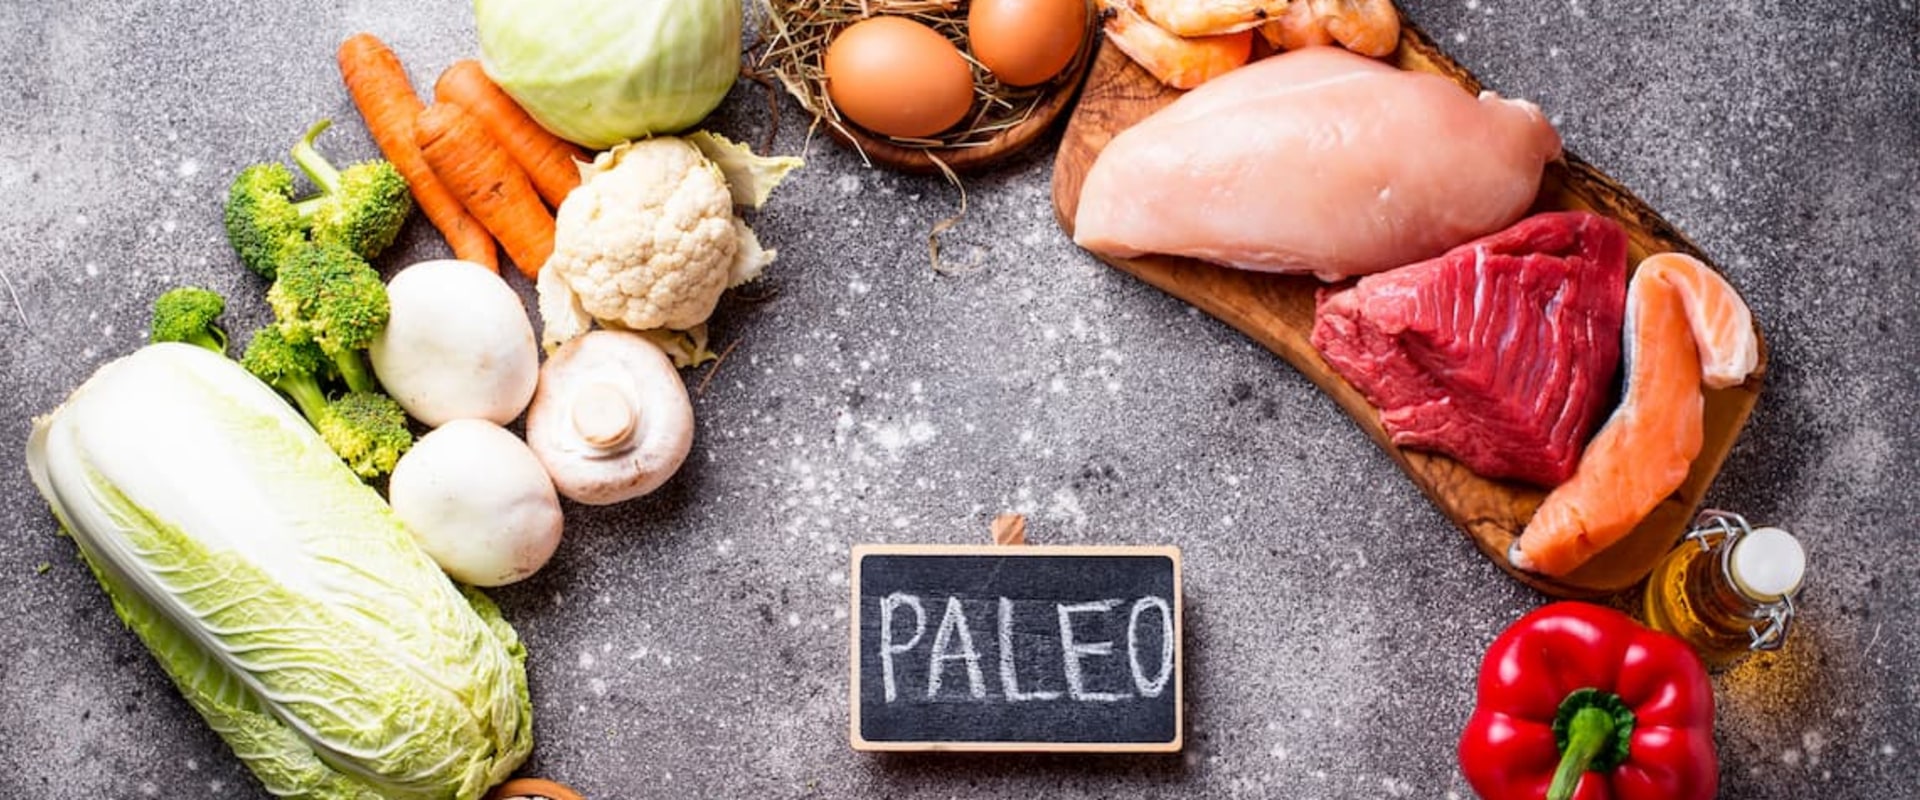 Can i eat sugar on a paleo diet?